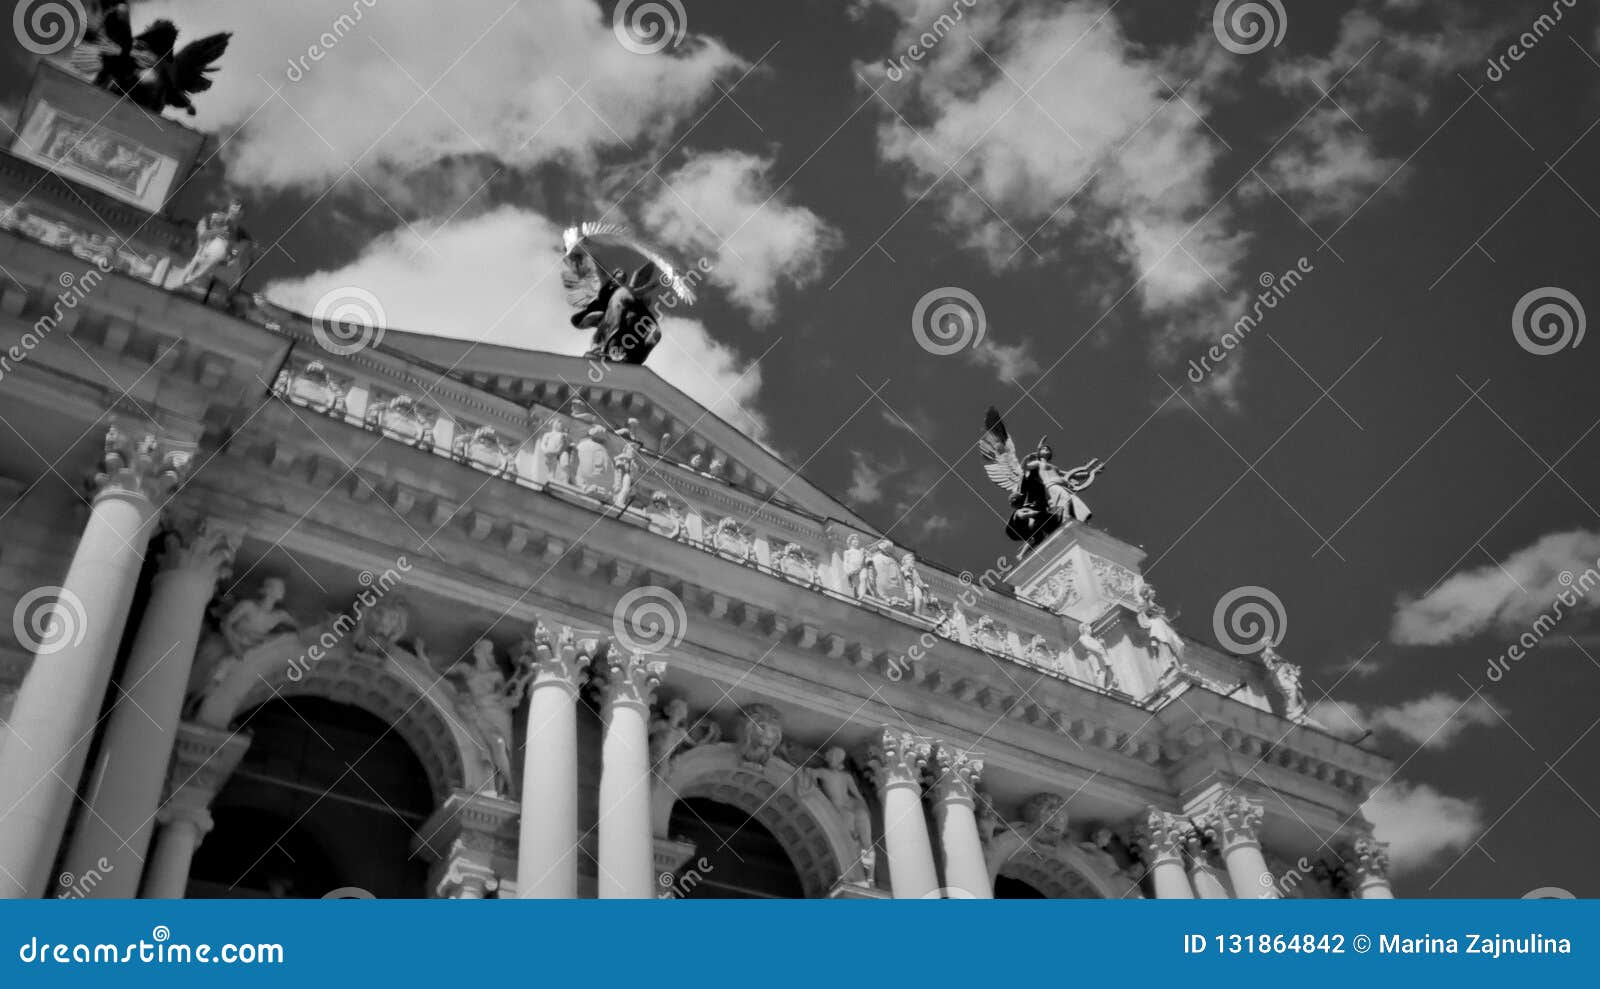 the roof of the opera house building in lviv / lwow ukraine